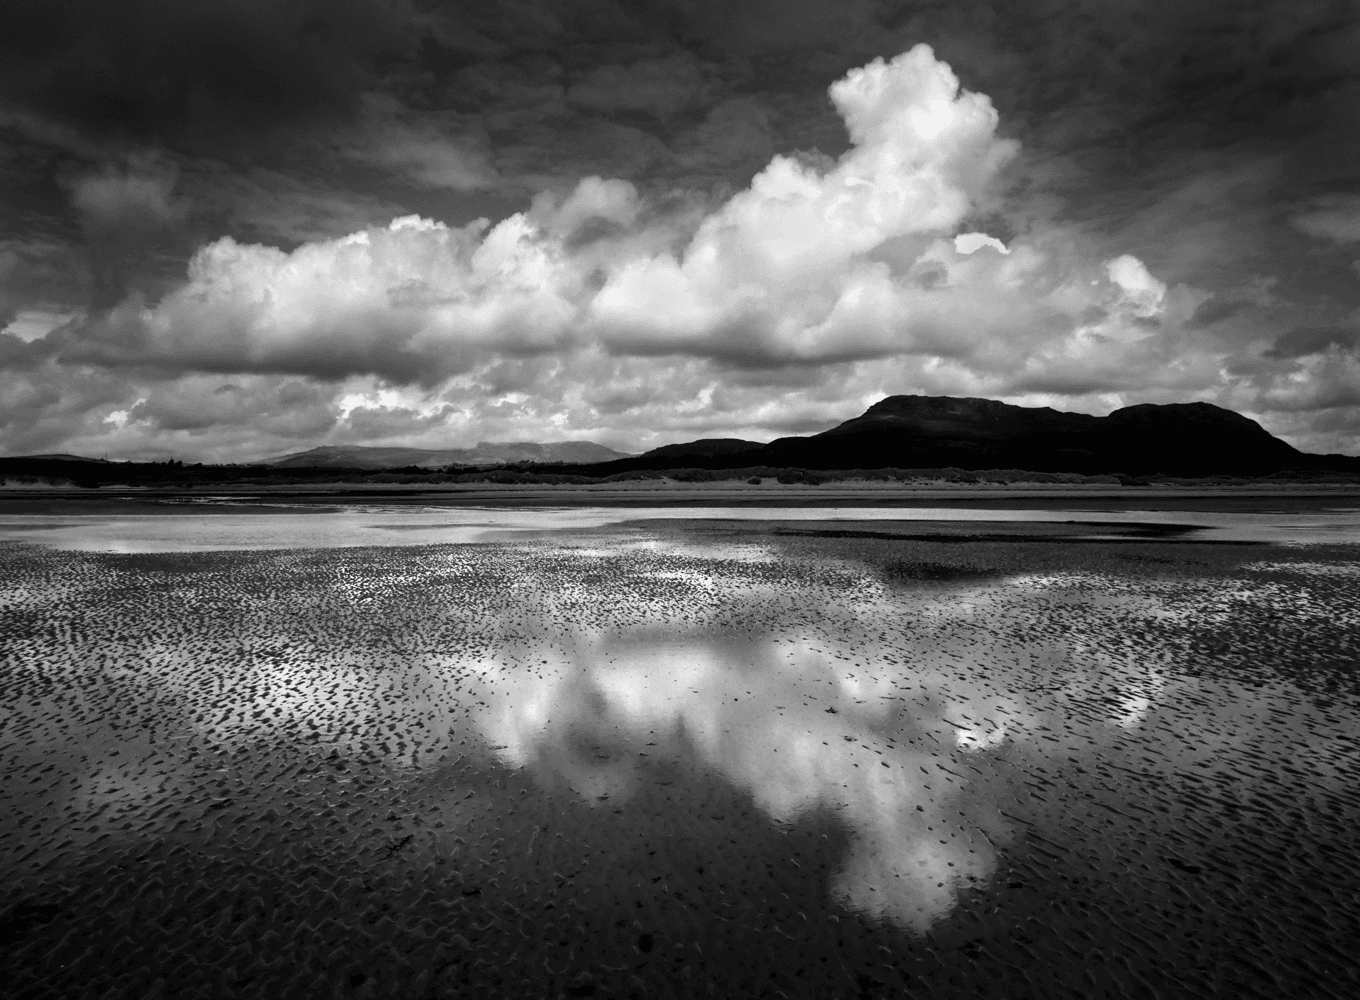 Sky Beach Reflection at Low Tide